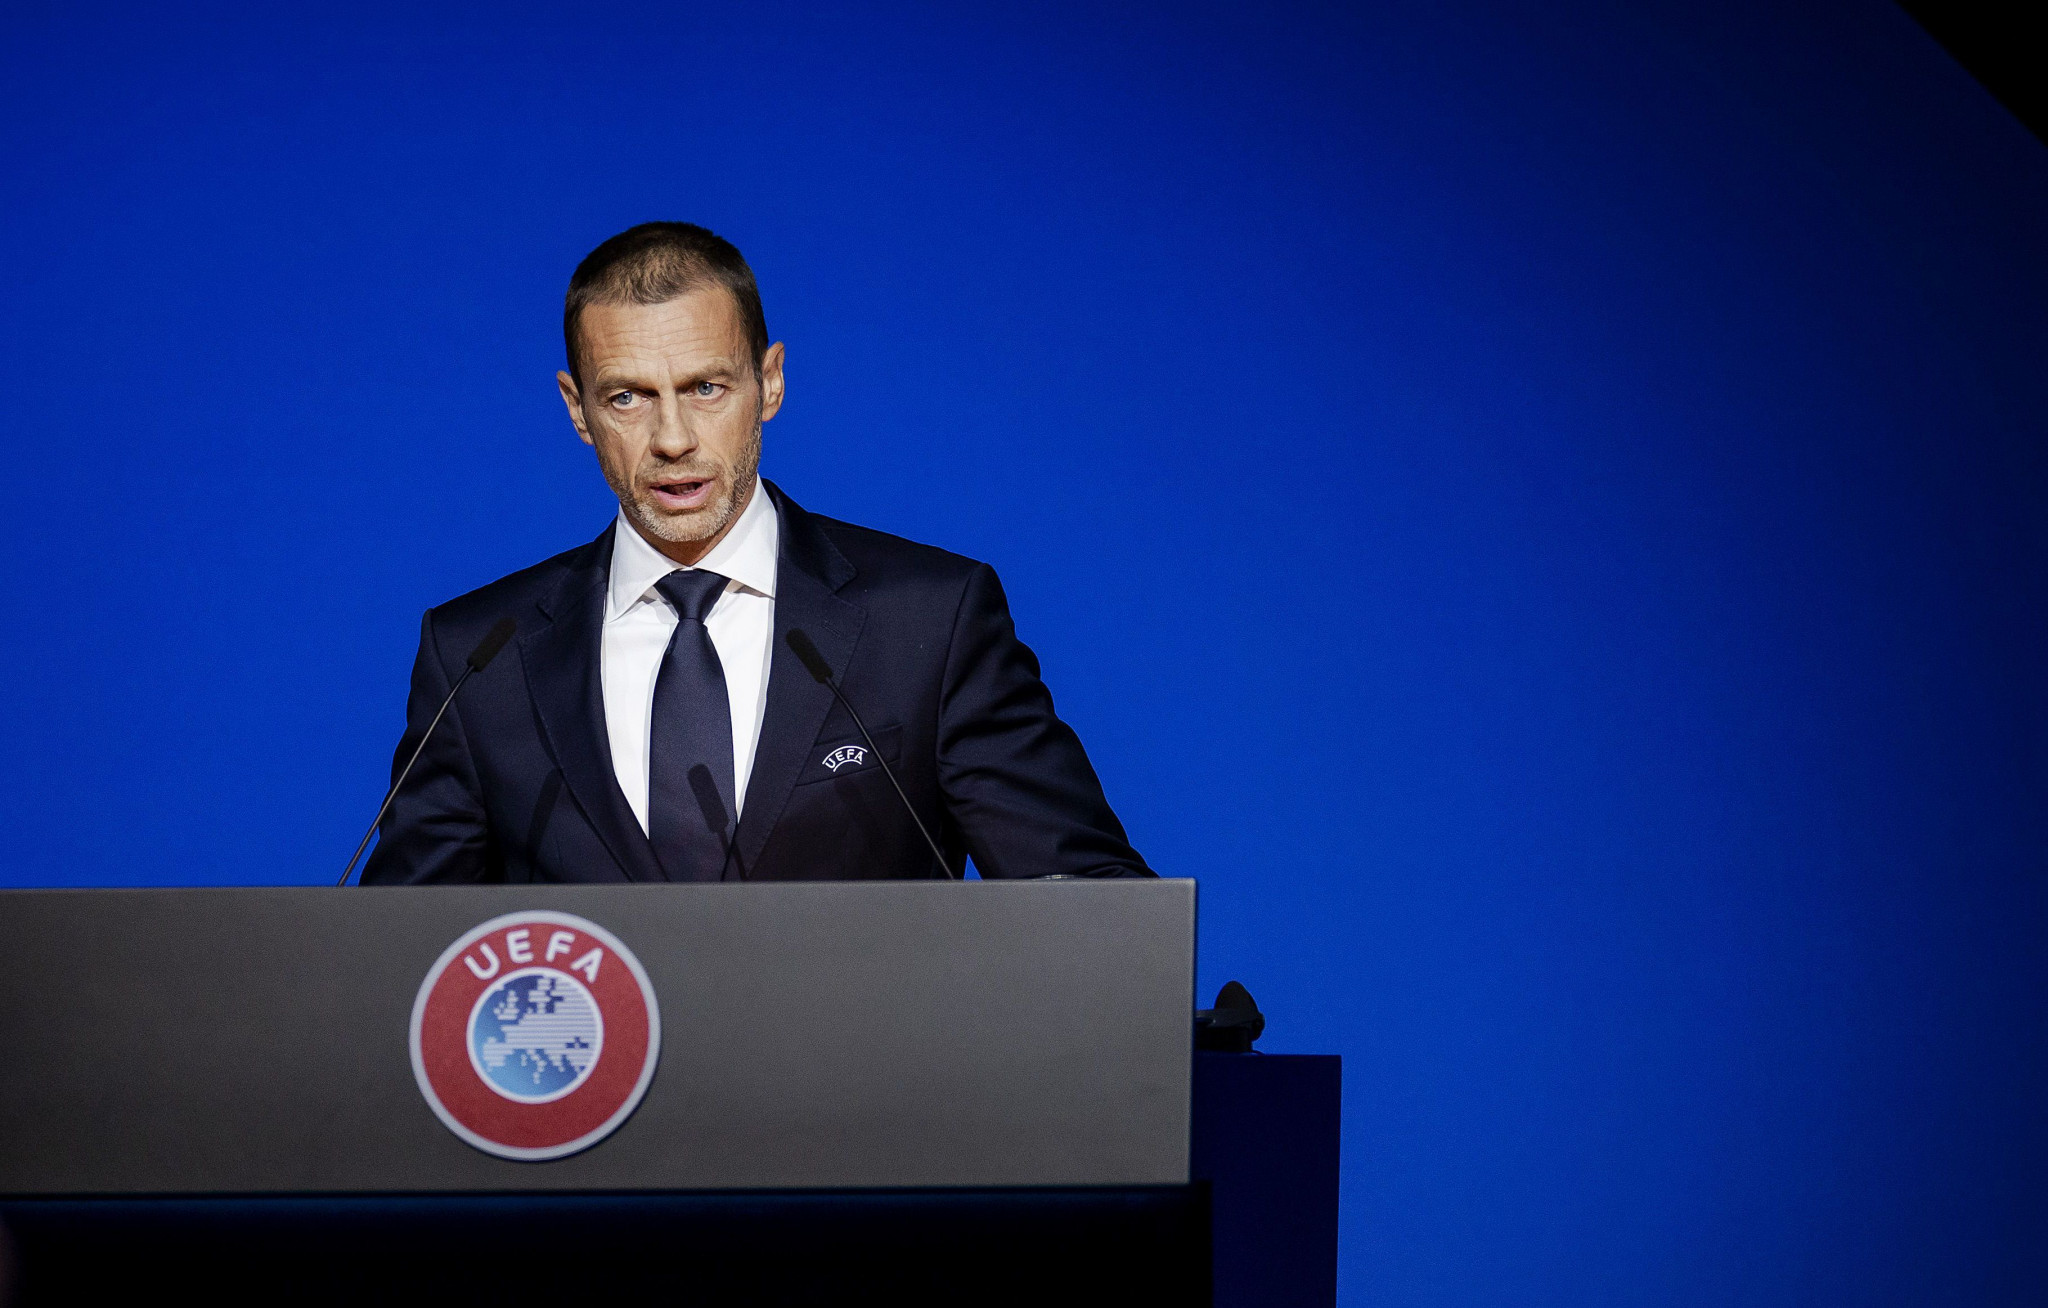 UEFA President Aleksander Čeferin says a decision will be made on Russia's Women's Euro 2022 participation soon ©Getty Images